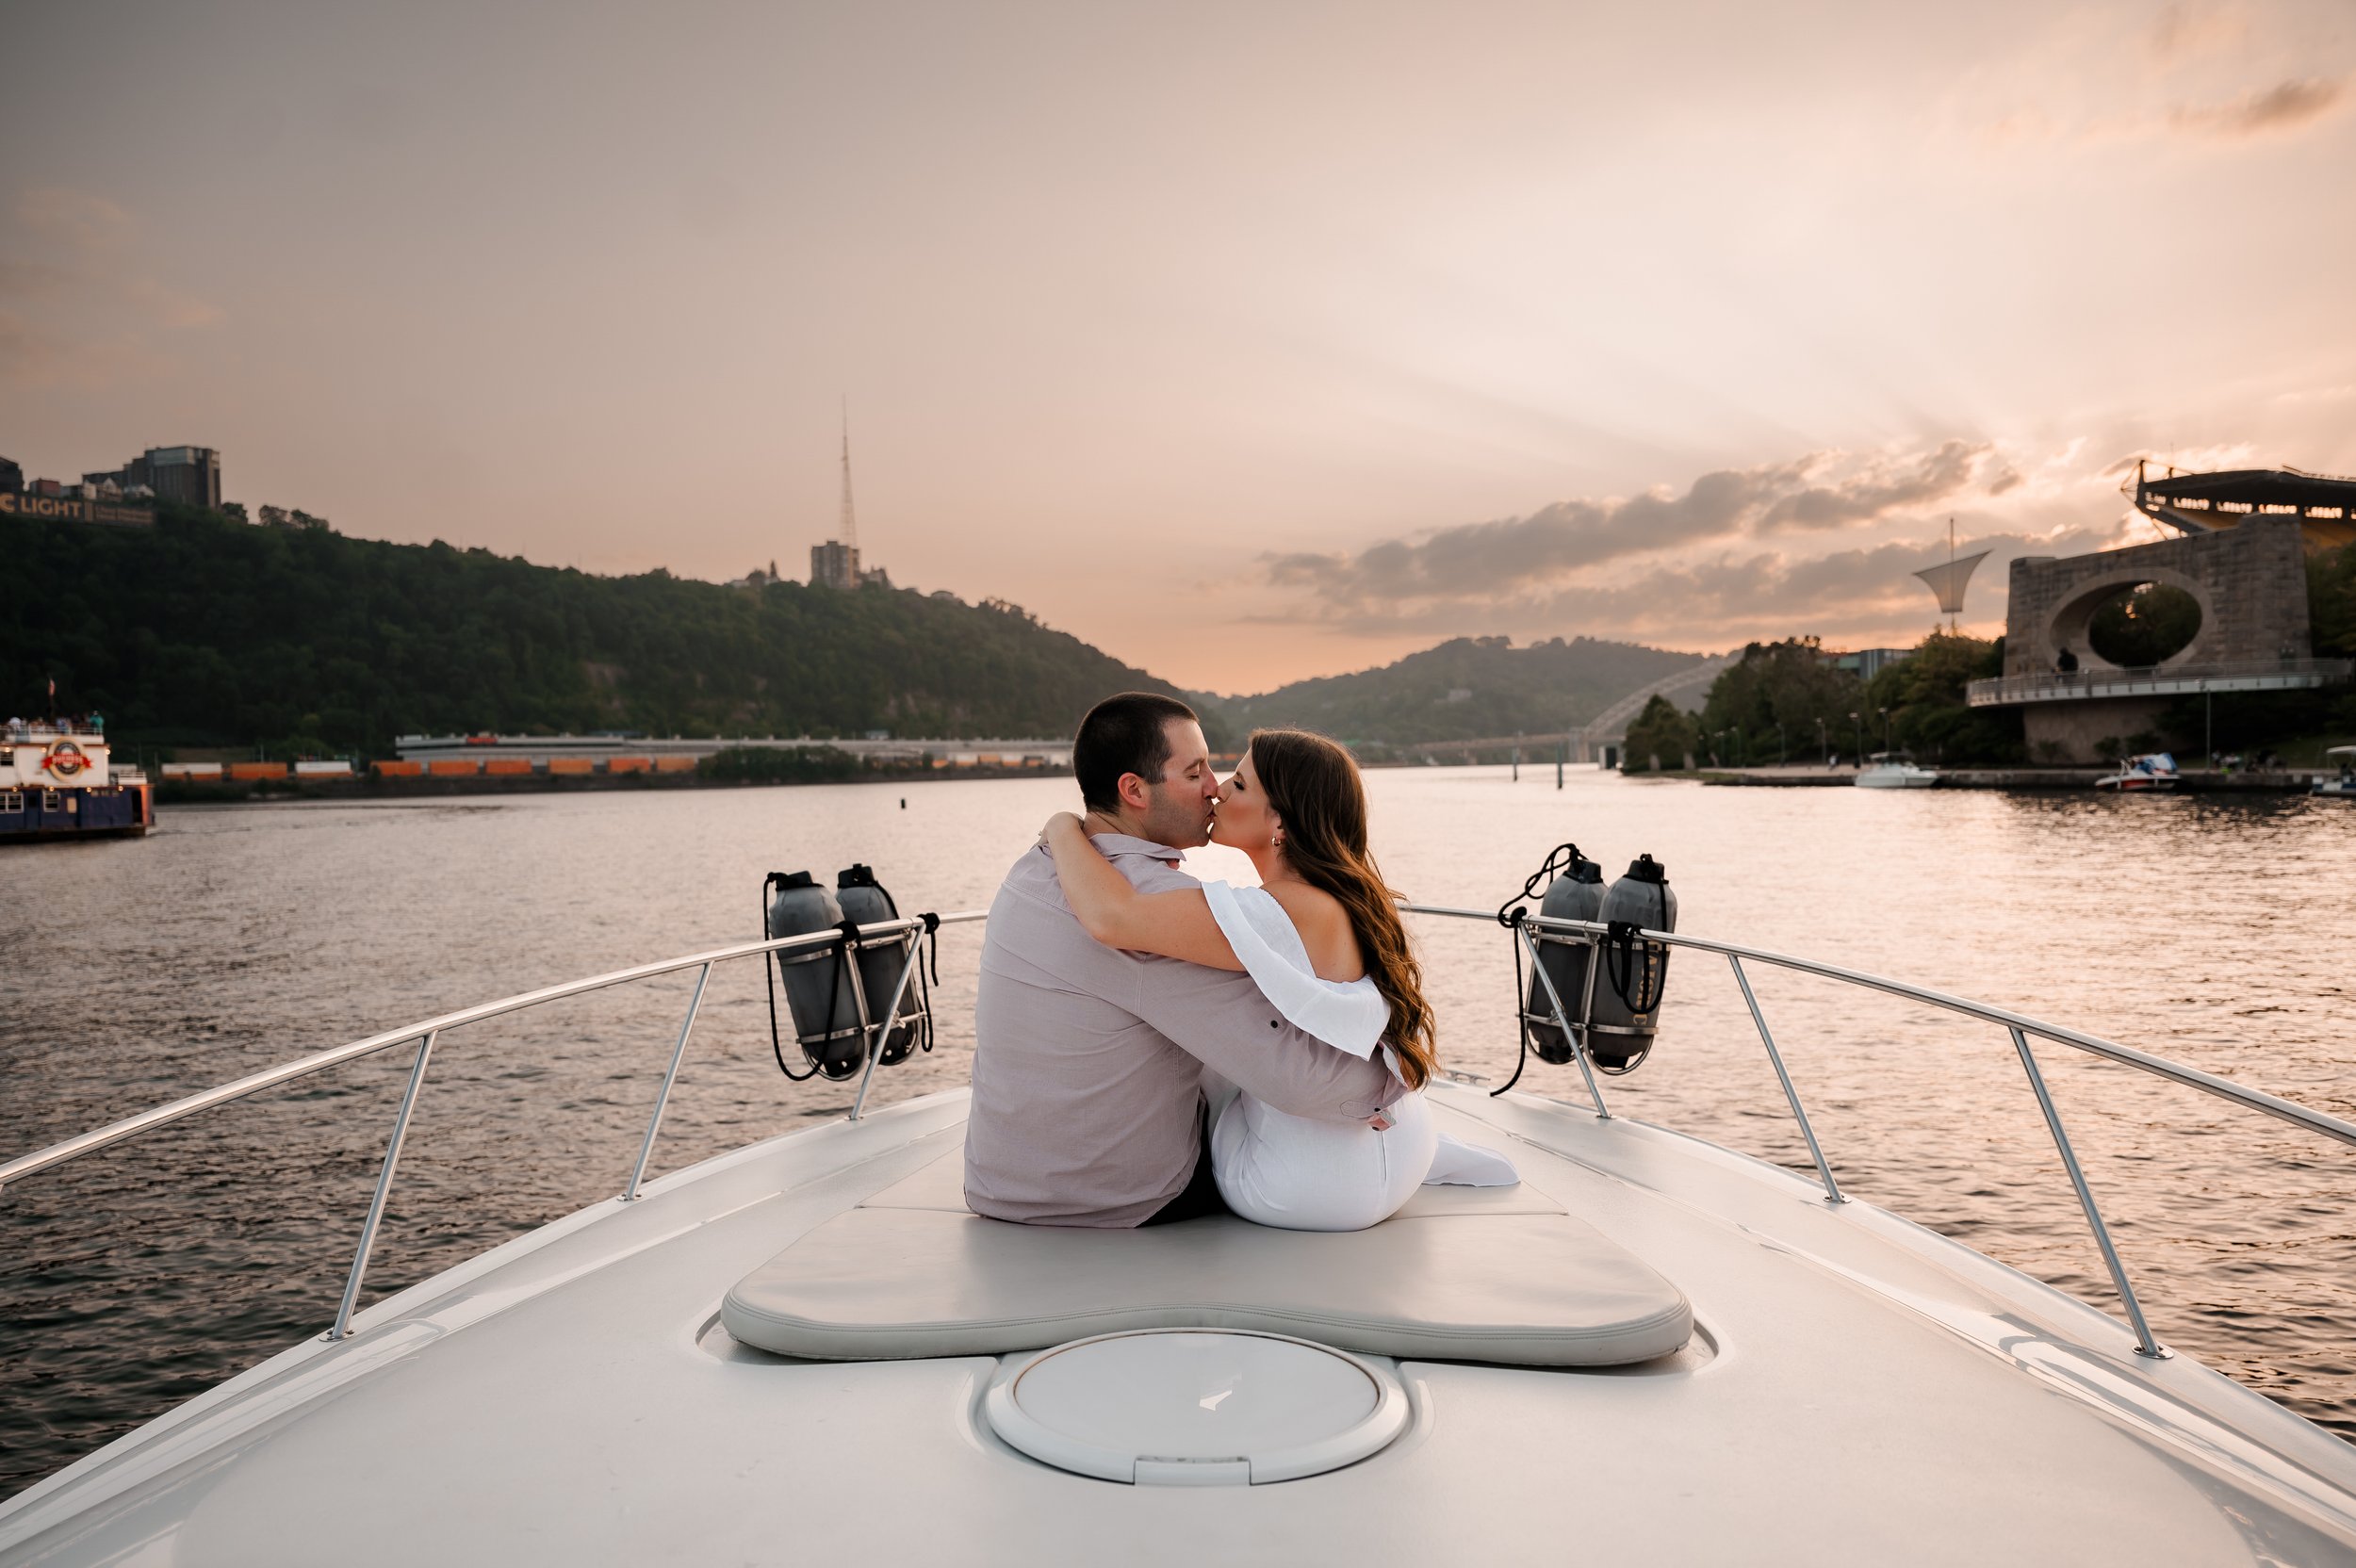 pittsburgh romantic boat down the river t engagement session art-2.jpg